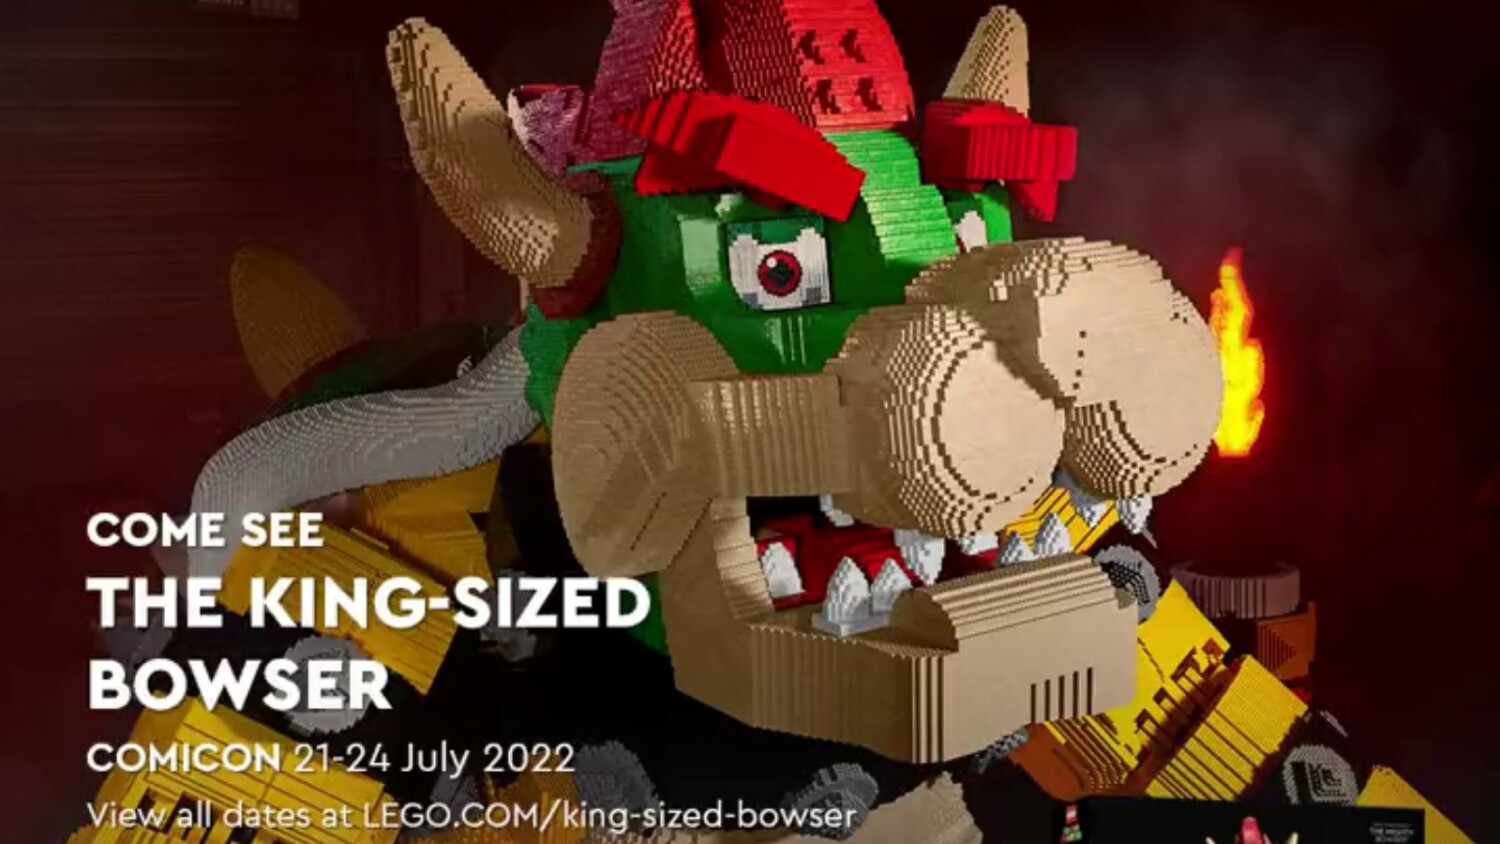 Lego at Comic-Con: An Array of Goodies Including 14-Foot Bowser